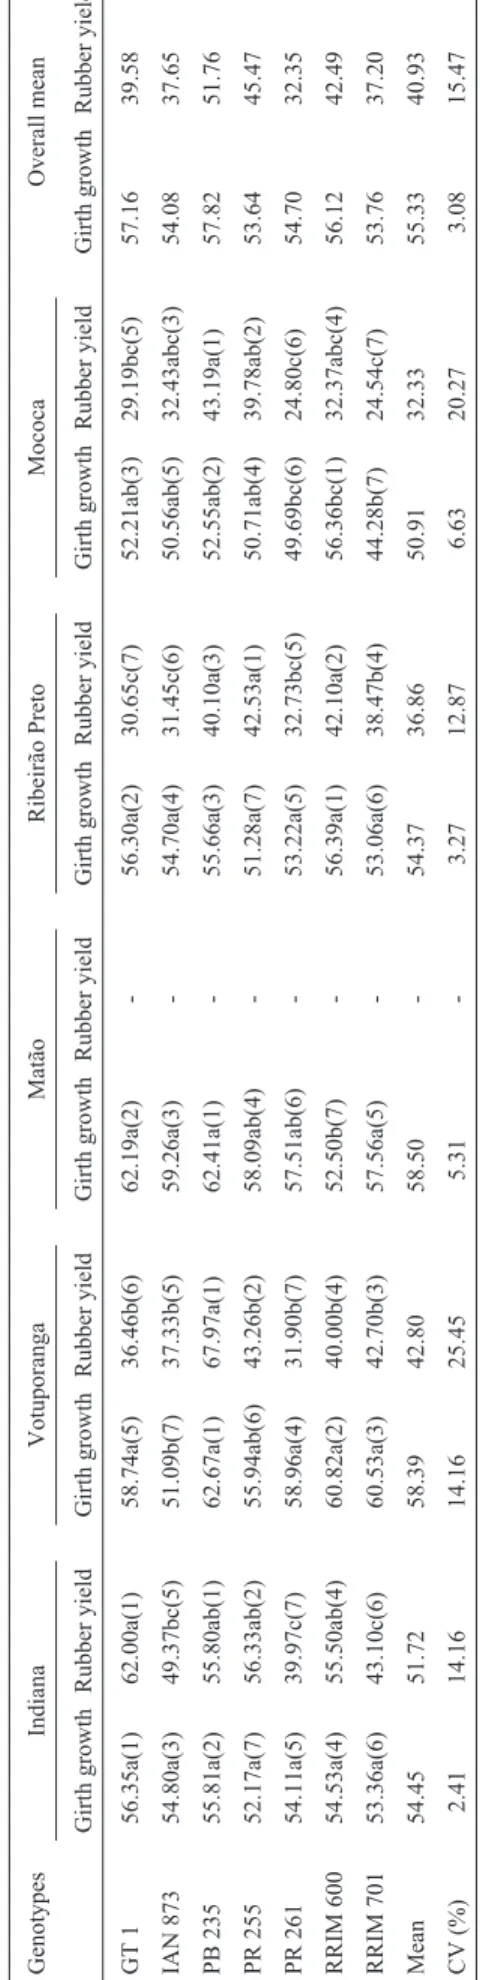 Table 3 - Analysis of variance of girth growth (cm) and rubber yield for seven Hevea genotypes (clones) tested at five locations in São Paulo State, Brazil.